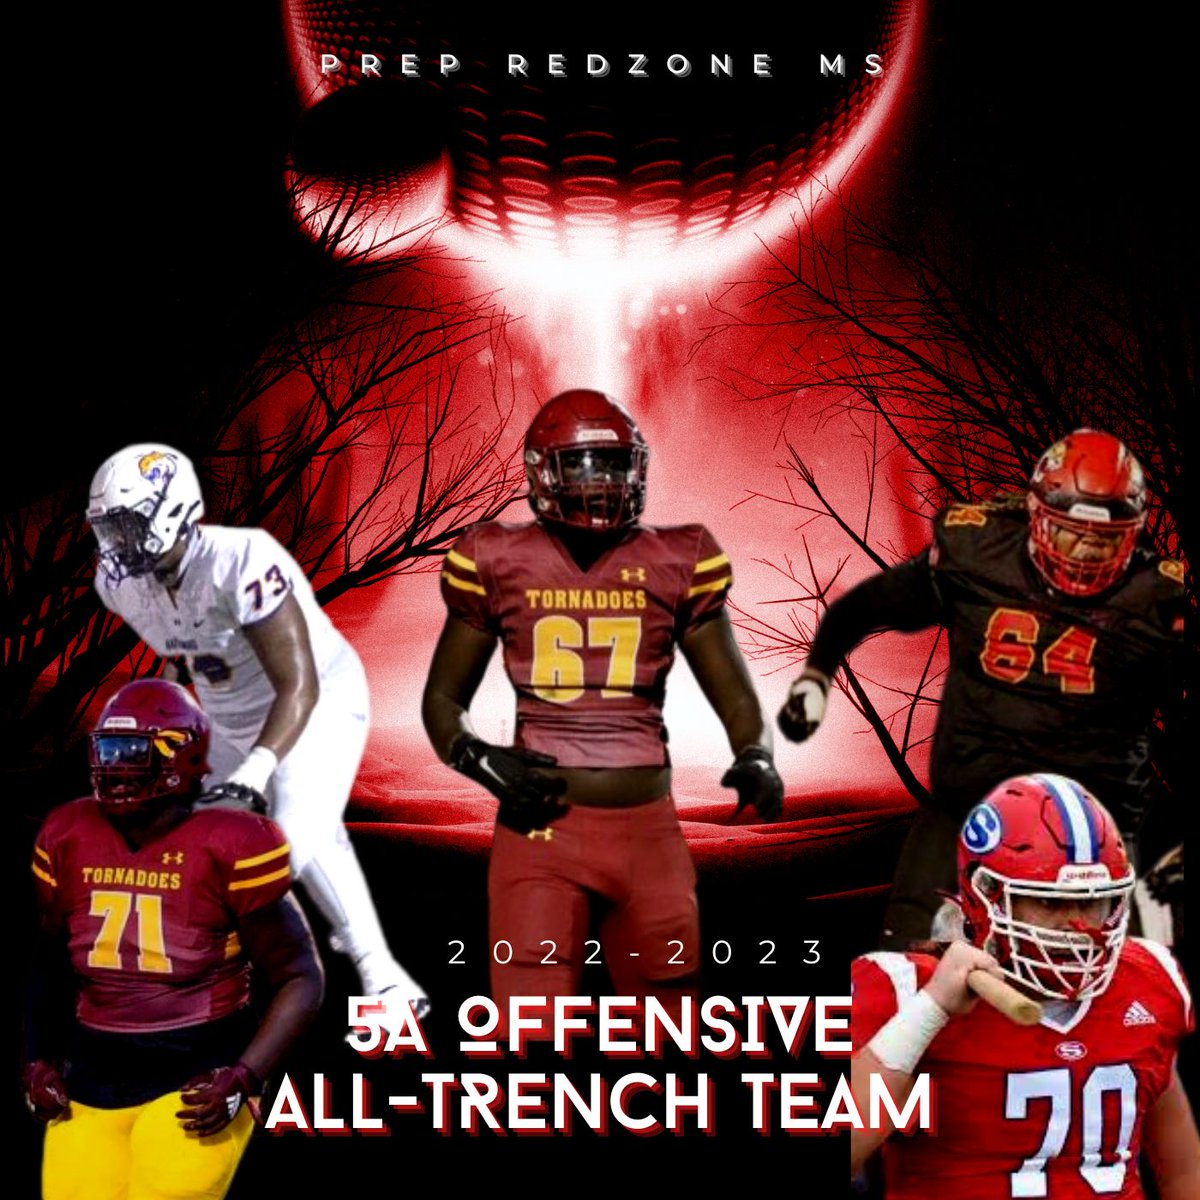 Just a few of the dawgs that stood out to me in the 5A Class this past season!! Your Prep Redzone Mississippi All Trench Team! 

@malachibreland1 @MalikEllis67 @Crozm4 @big_baker73 @DequariousWhite @McdonaldAlwayne @BrendonMagee4 @Cordarren72